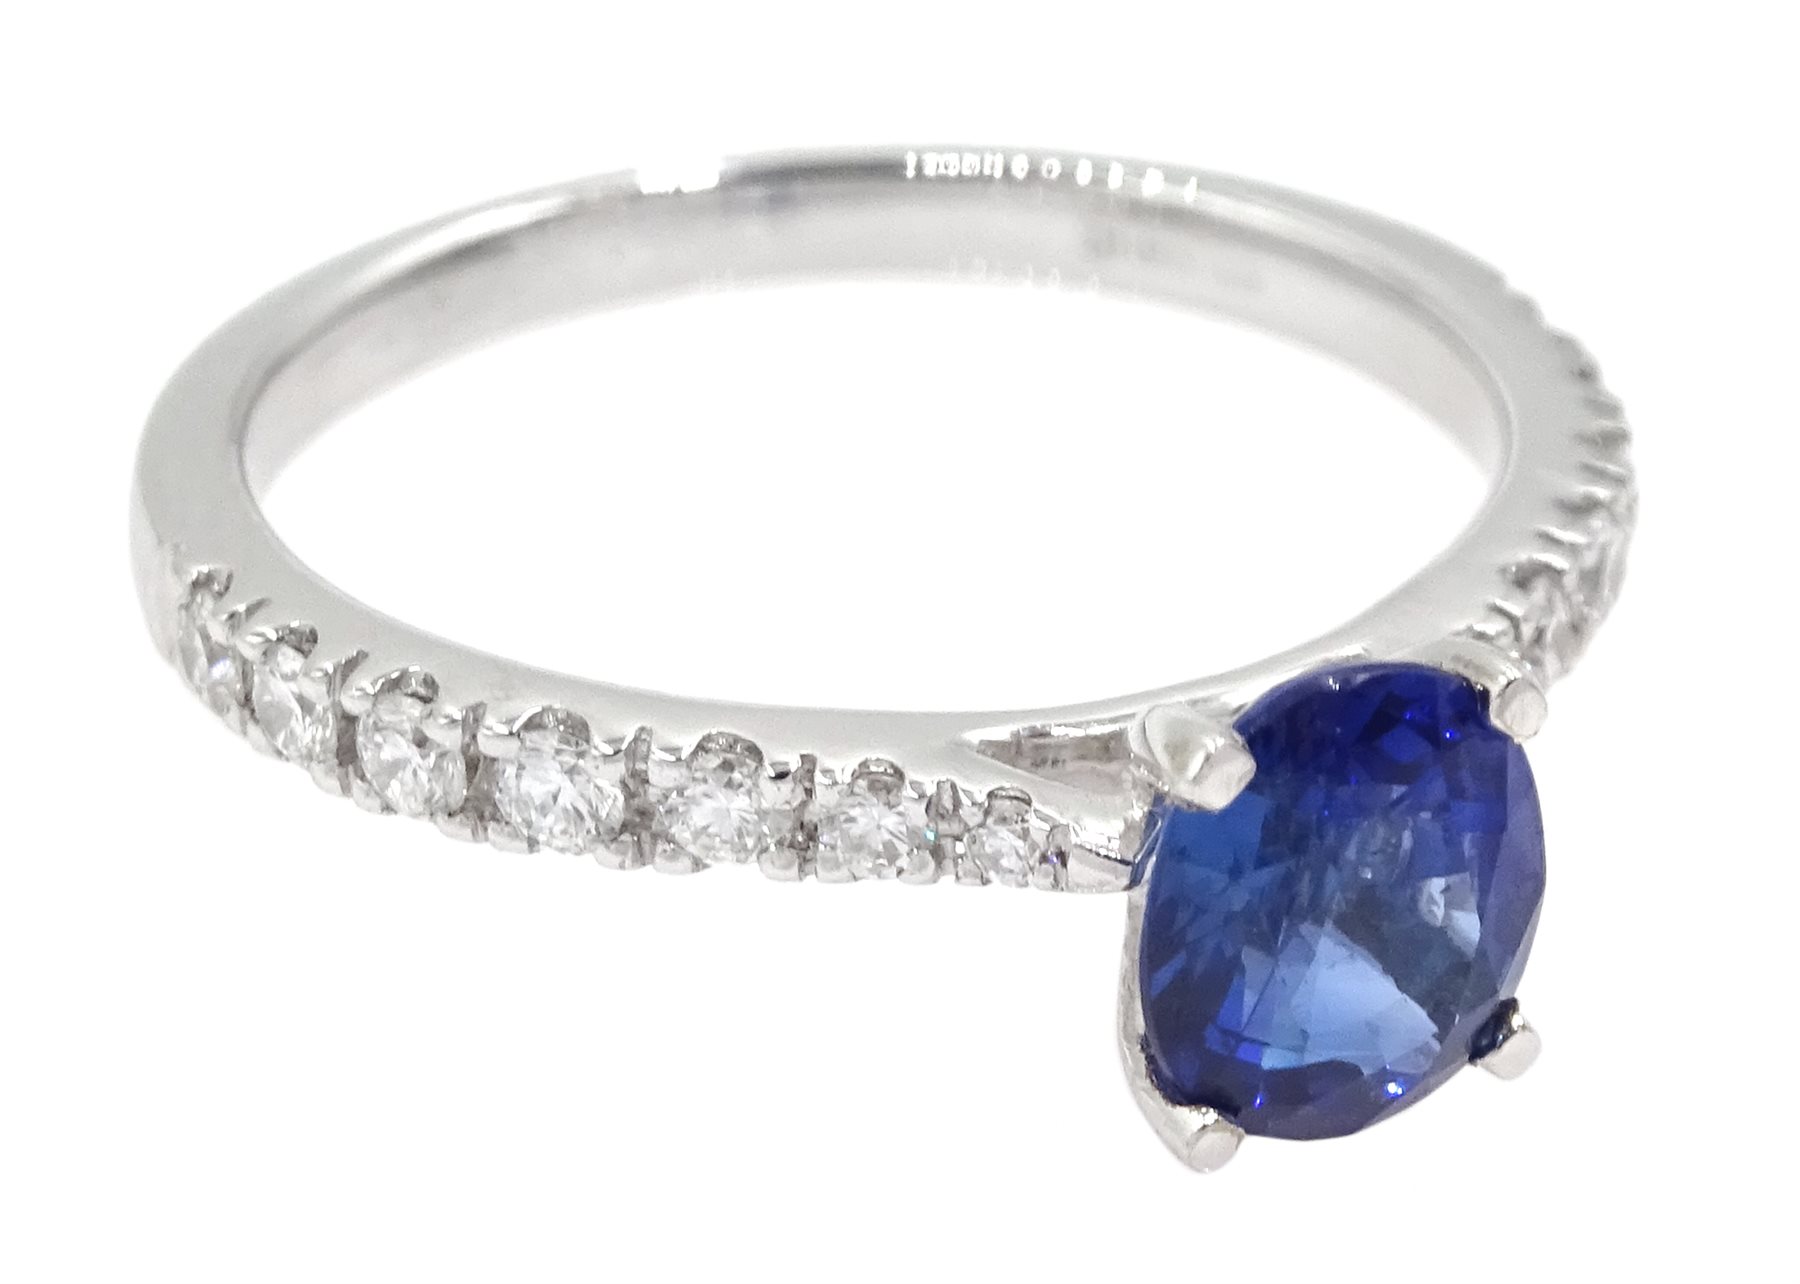 18ct white gold oval Ceylon sapphire ring - Image 3 of 5